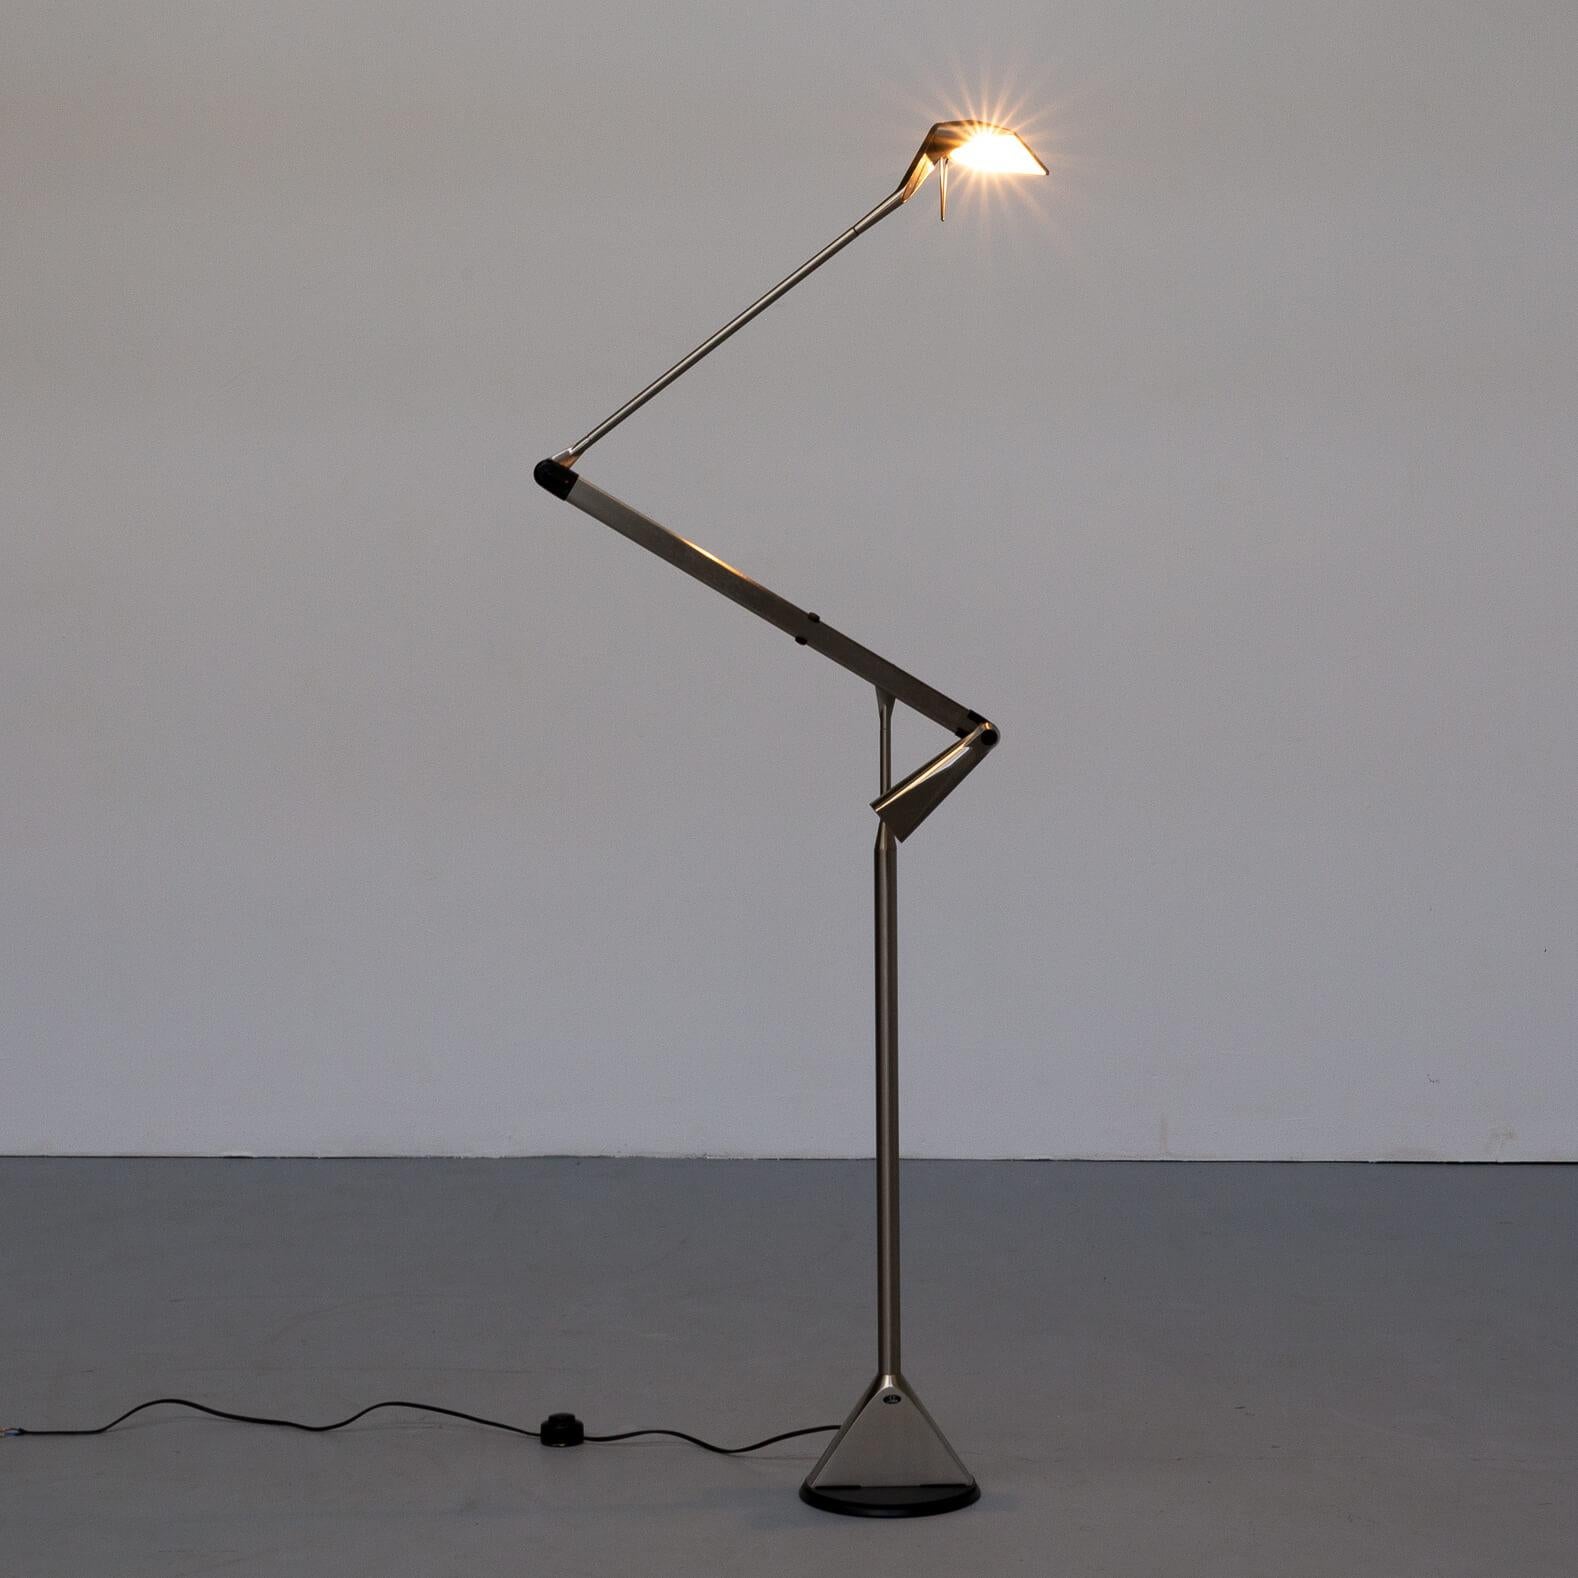 The Lumina Zelig Terra floor lamp was designed by A. Monici for Lumina. All Lumina lamps are handmade at the studio in Arluno (Italy). Its design and used materials give this lamp a special appearance.
The Zelig Terra has a unique balancing system